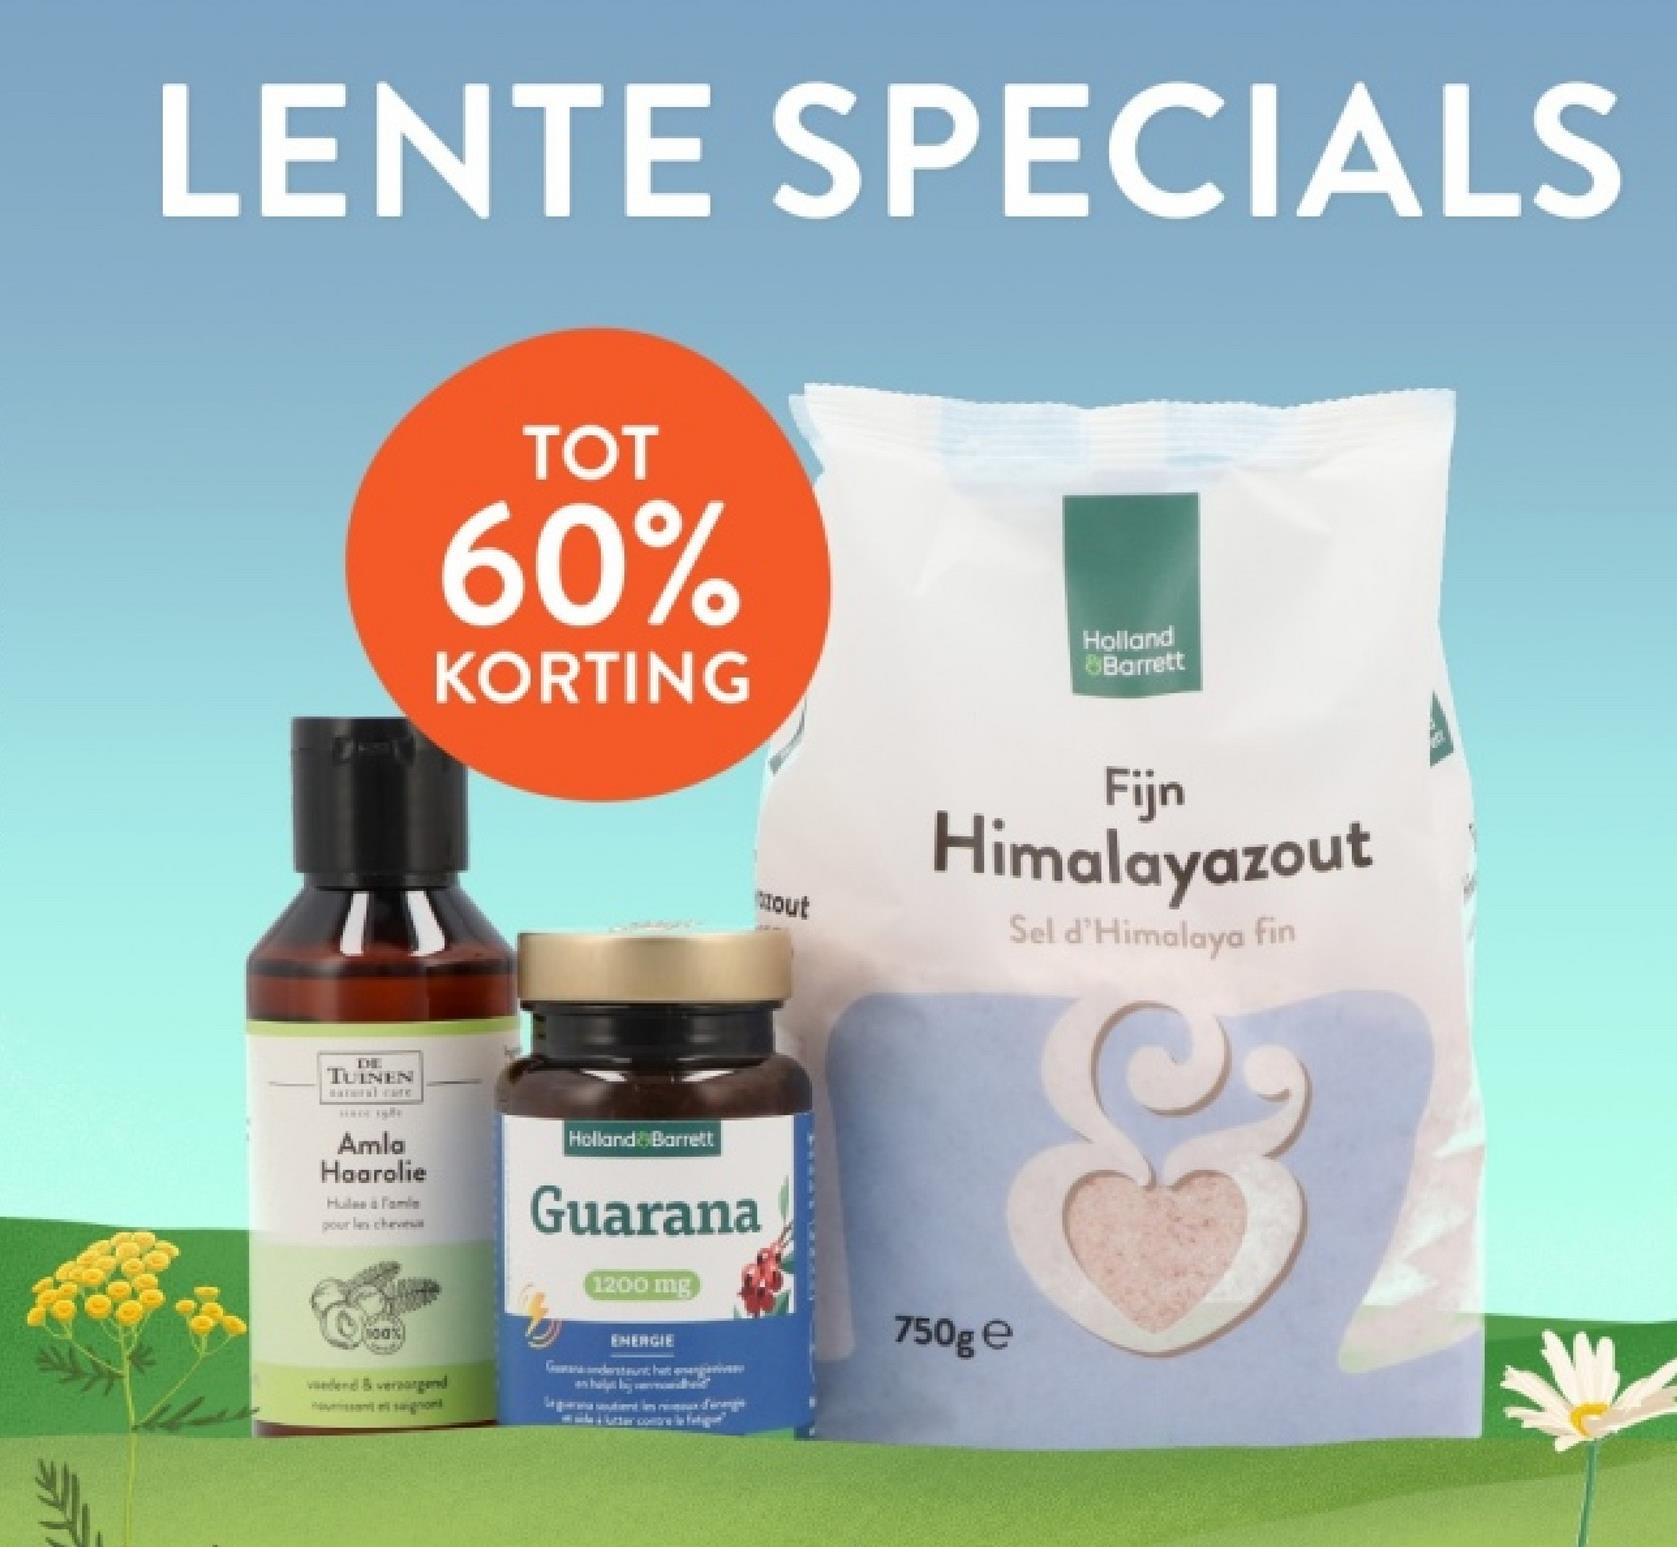 LENTE SPECIALS
THE
TUINEN
atural cate
Amla
Haarolie
Hules & Fami
pour le chev
TOT
60%
KORTING
Holland
8Barrett
100%
eded&veraged
Holland Barrett
Guarana
1200 mg
ENERGIE
Gh
trout
Fijn
Himalayazout
Sel d'Himalaya fin
750g e